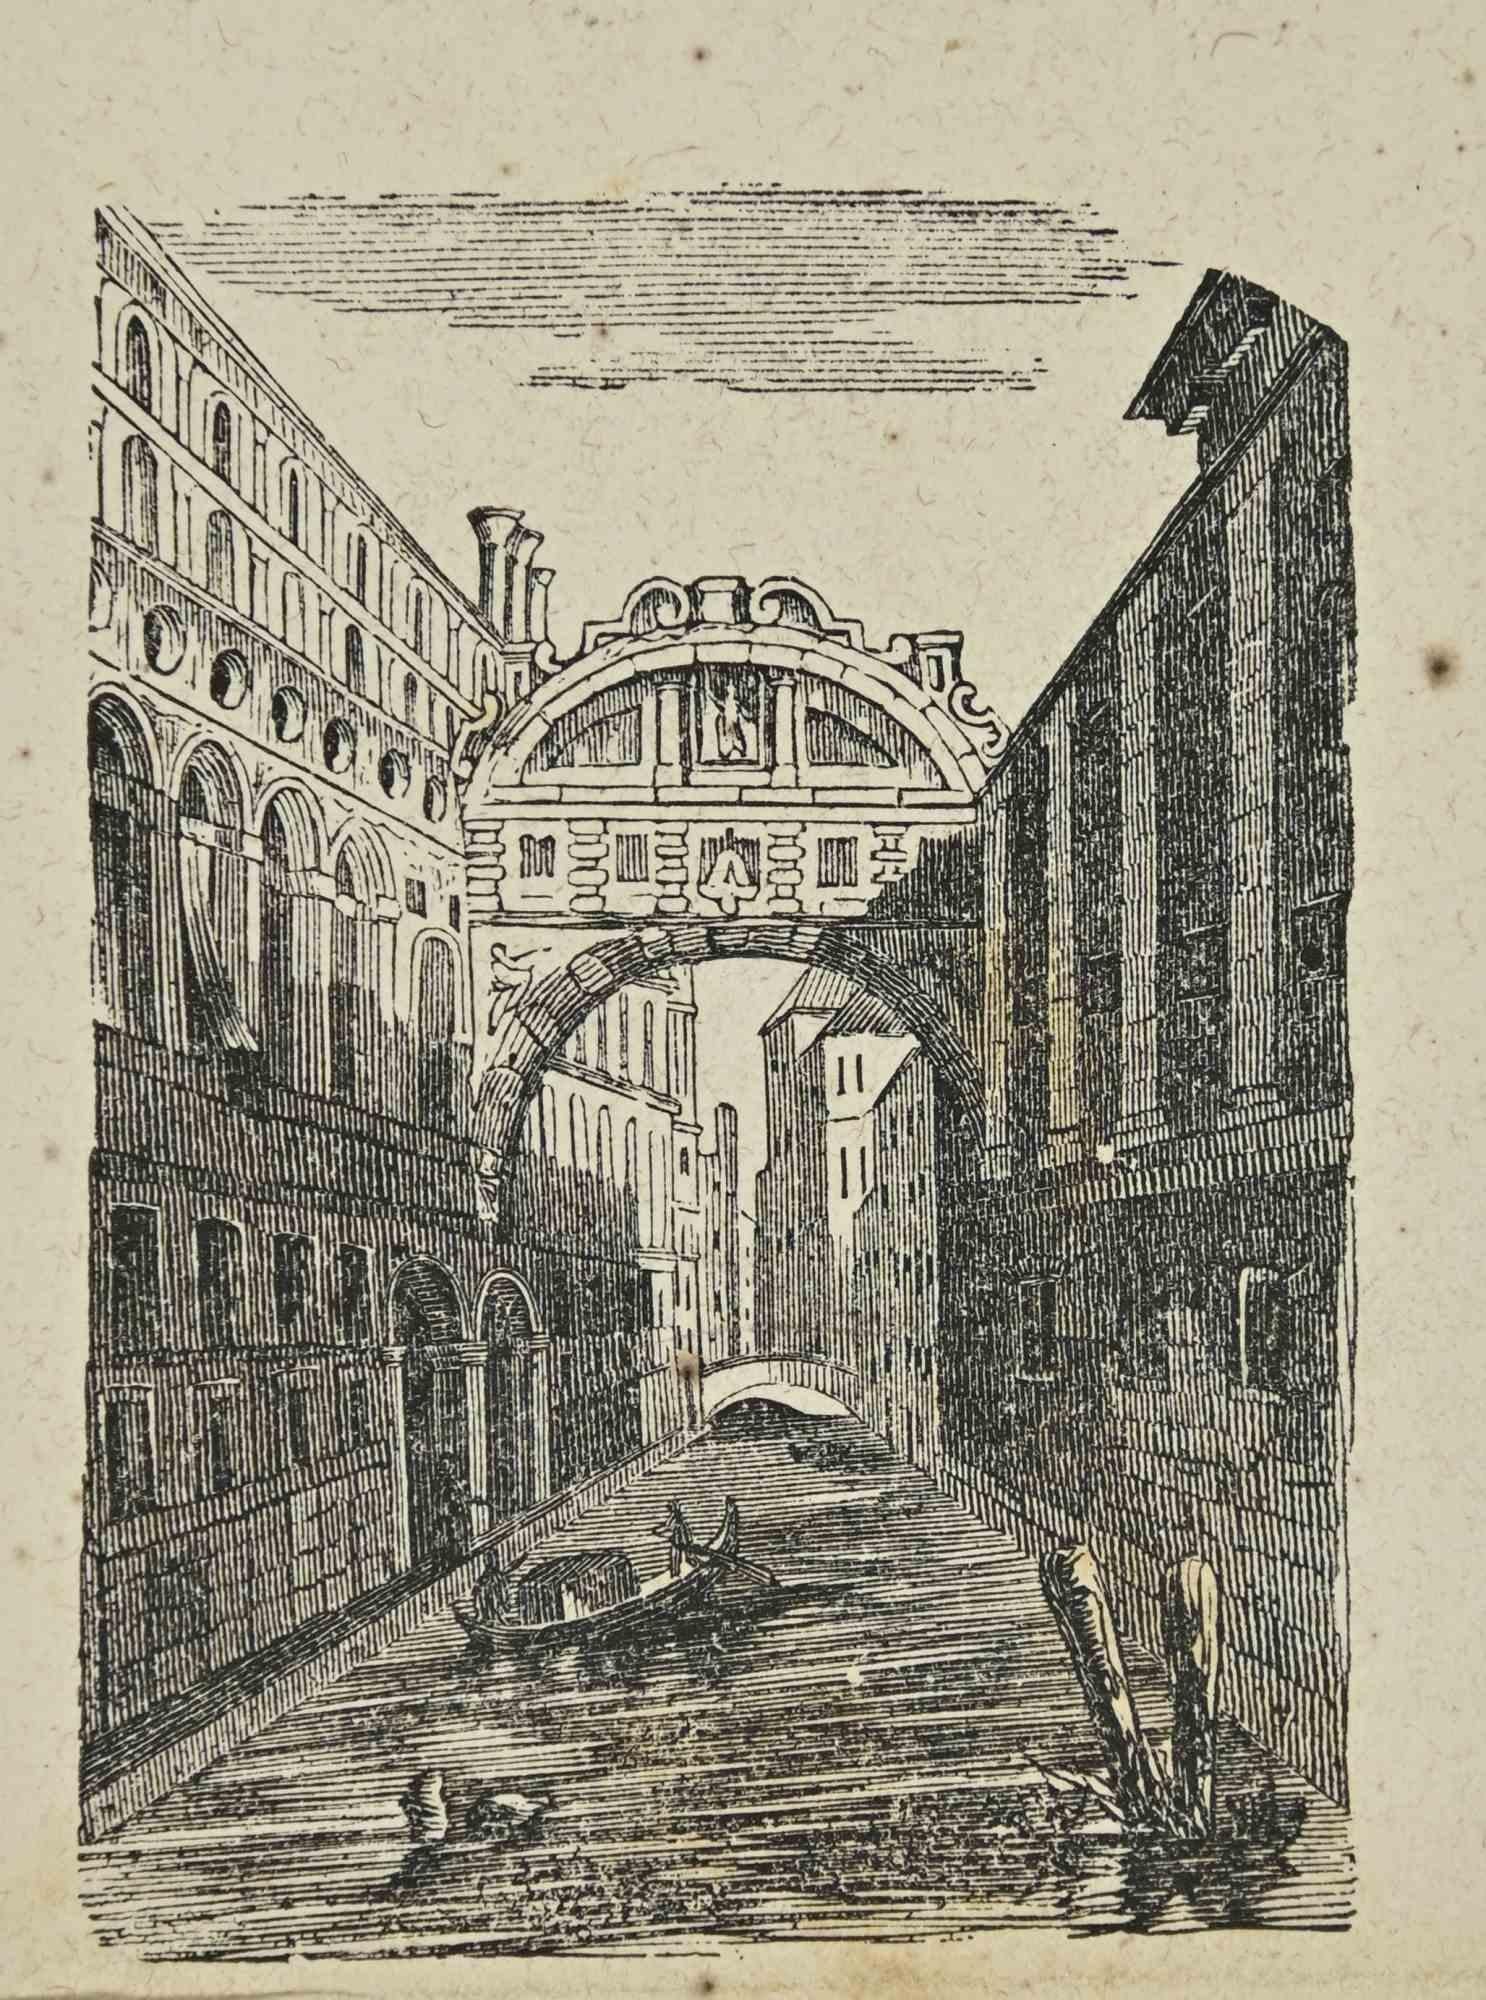 Uses and Customs - Bridge in Venice - Lithograph - 1862